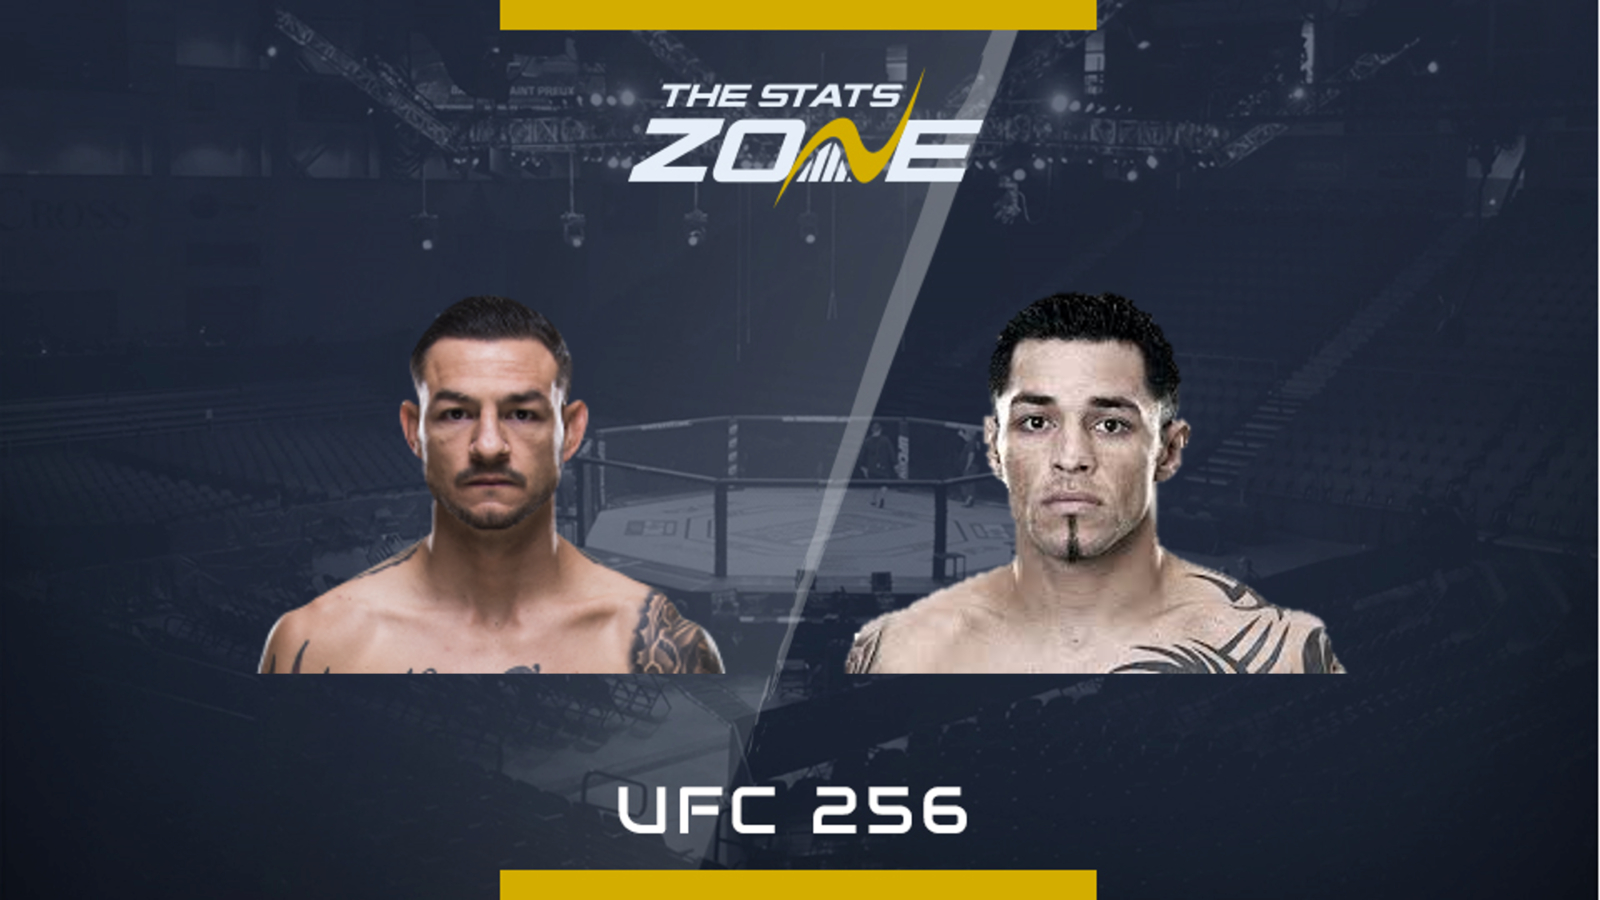 E6nu87qvk3ulpm He is an actor, known for gleichschaltung, королевство (2014) and ufc on fox (2011). https www thestatszone com mma mma preview cub swanson vs daniel pineda at ufc 256 1485458